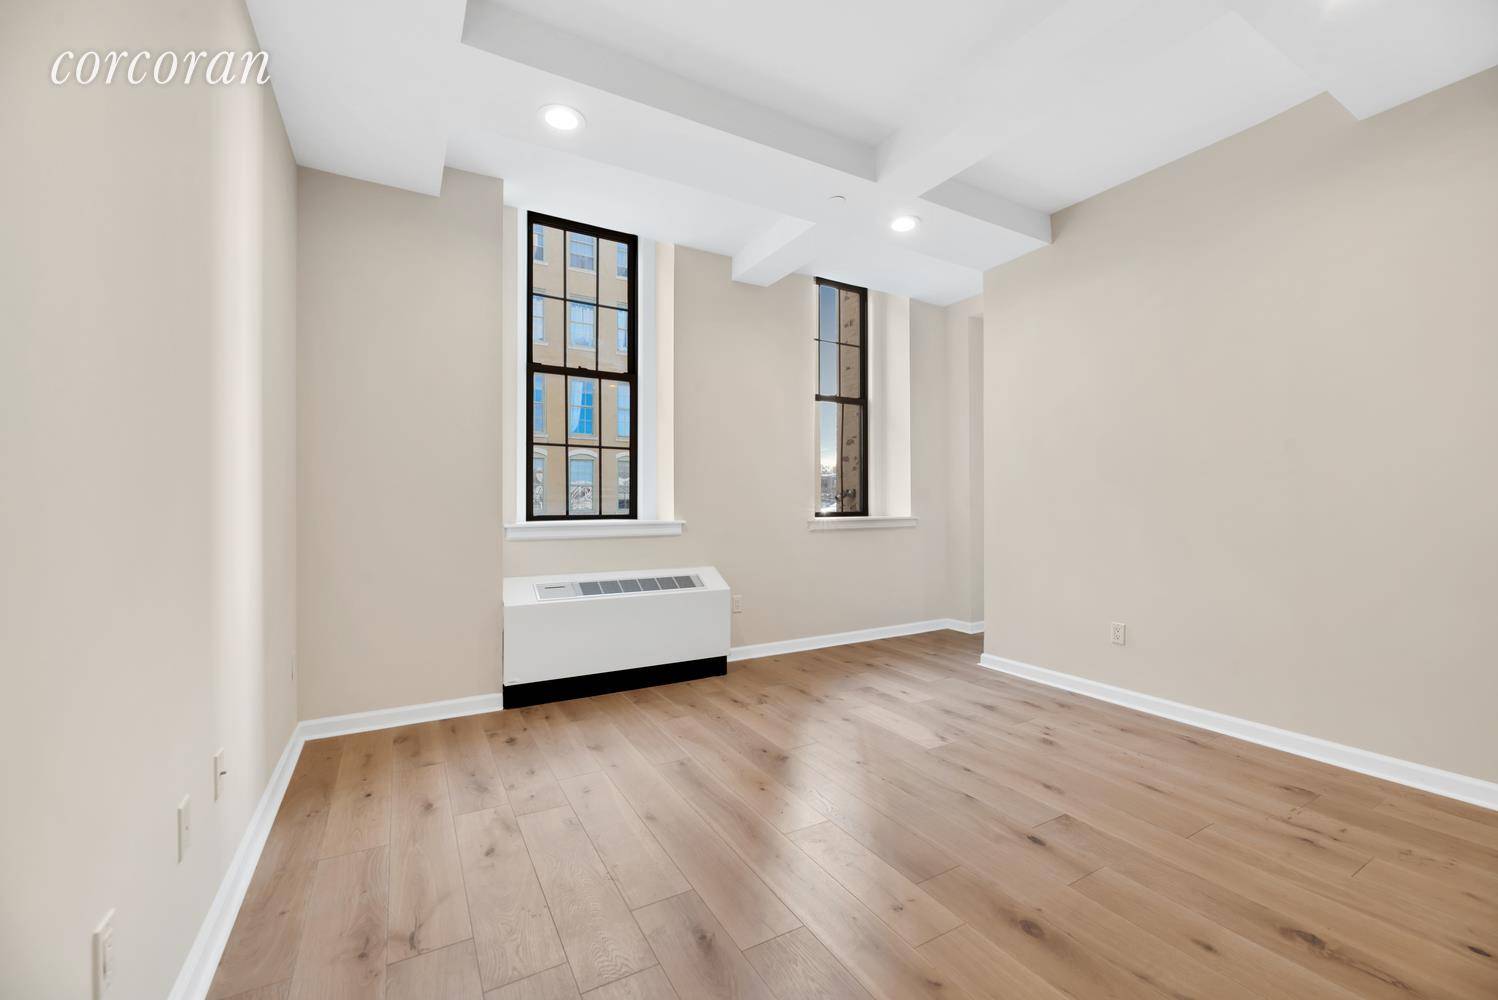 Stunning one bedroom condo apartment at The Pistilli Grand Manor features 10' soaring ceilings with enormous windows give incomparable light in this very rare converted warehouse building.